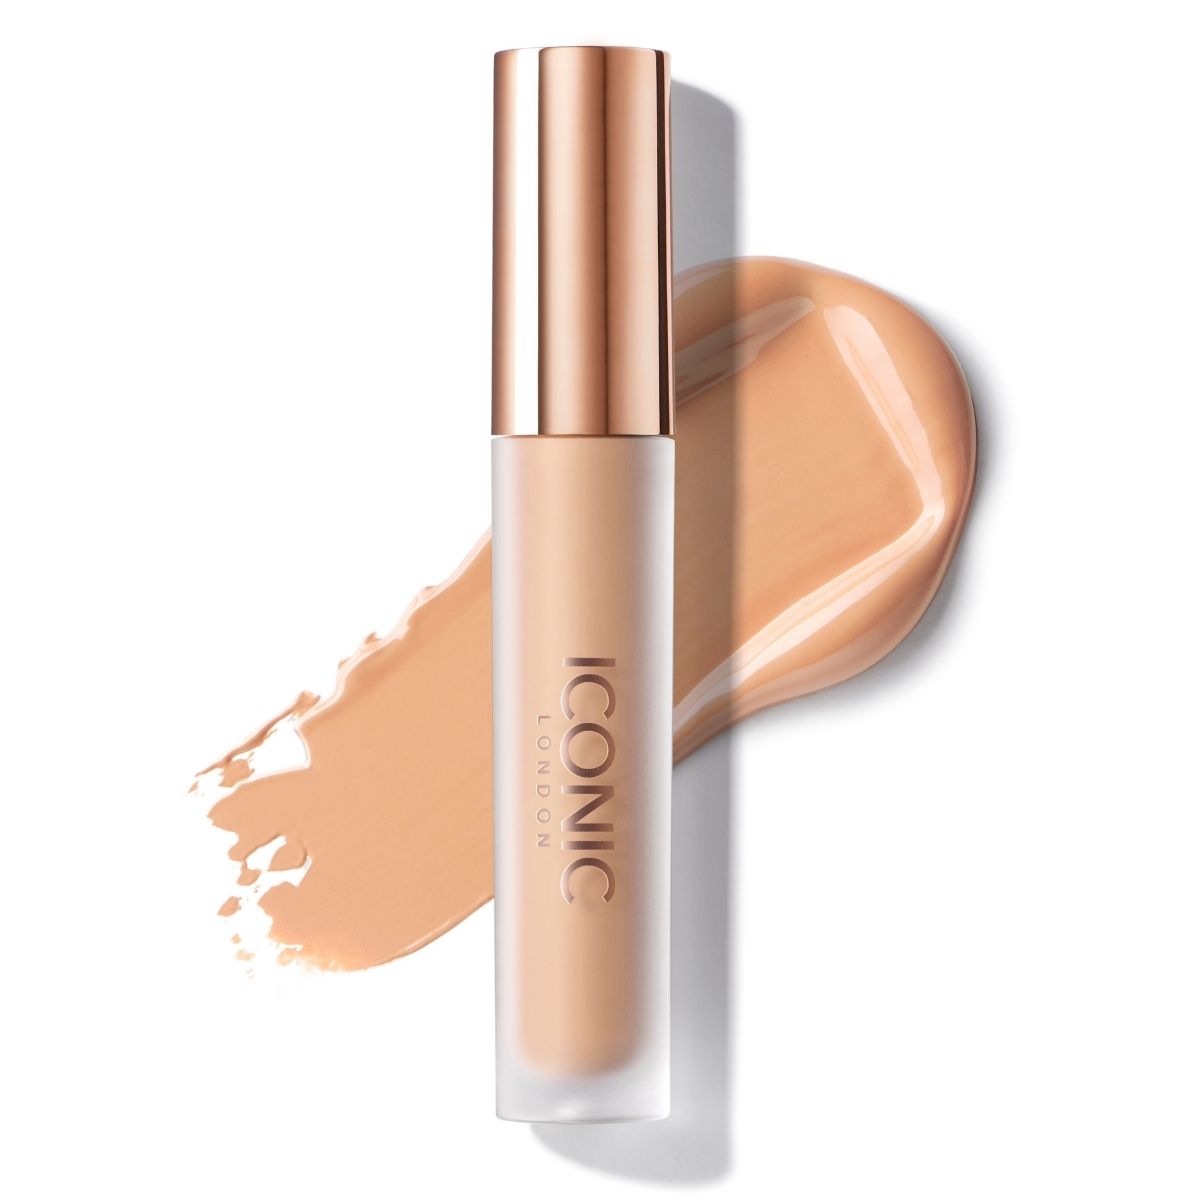 Iconic London Seamless Concealer.